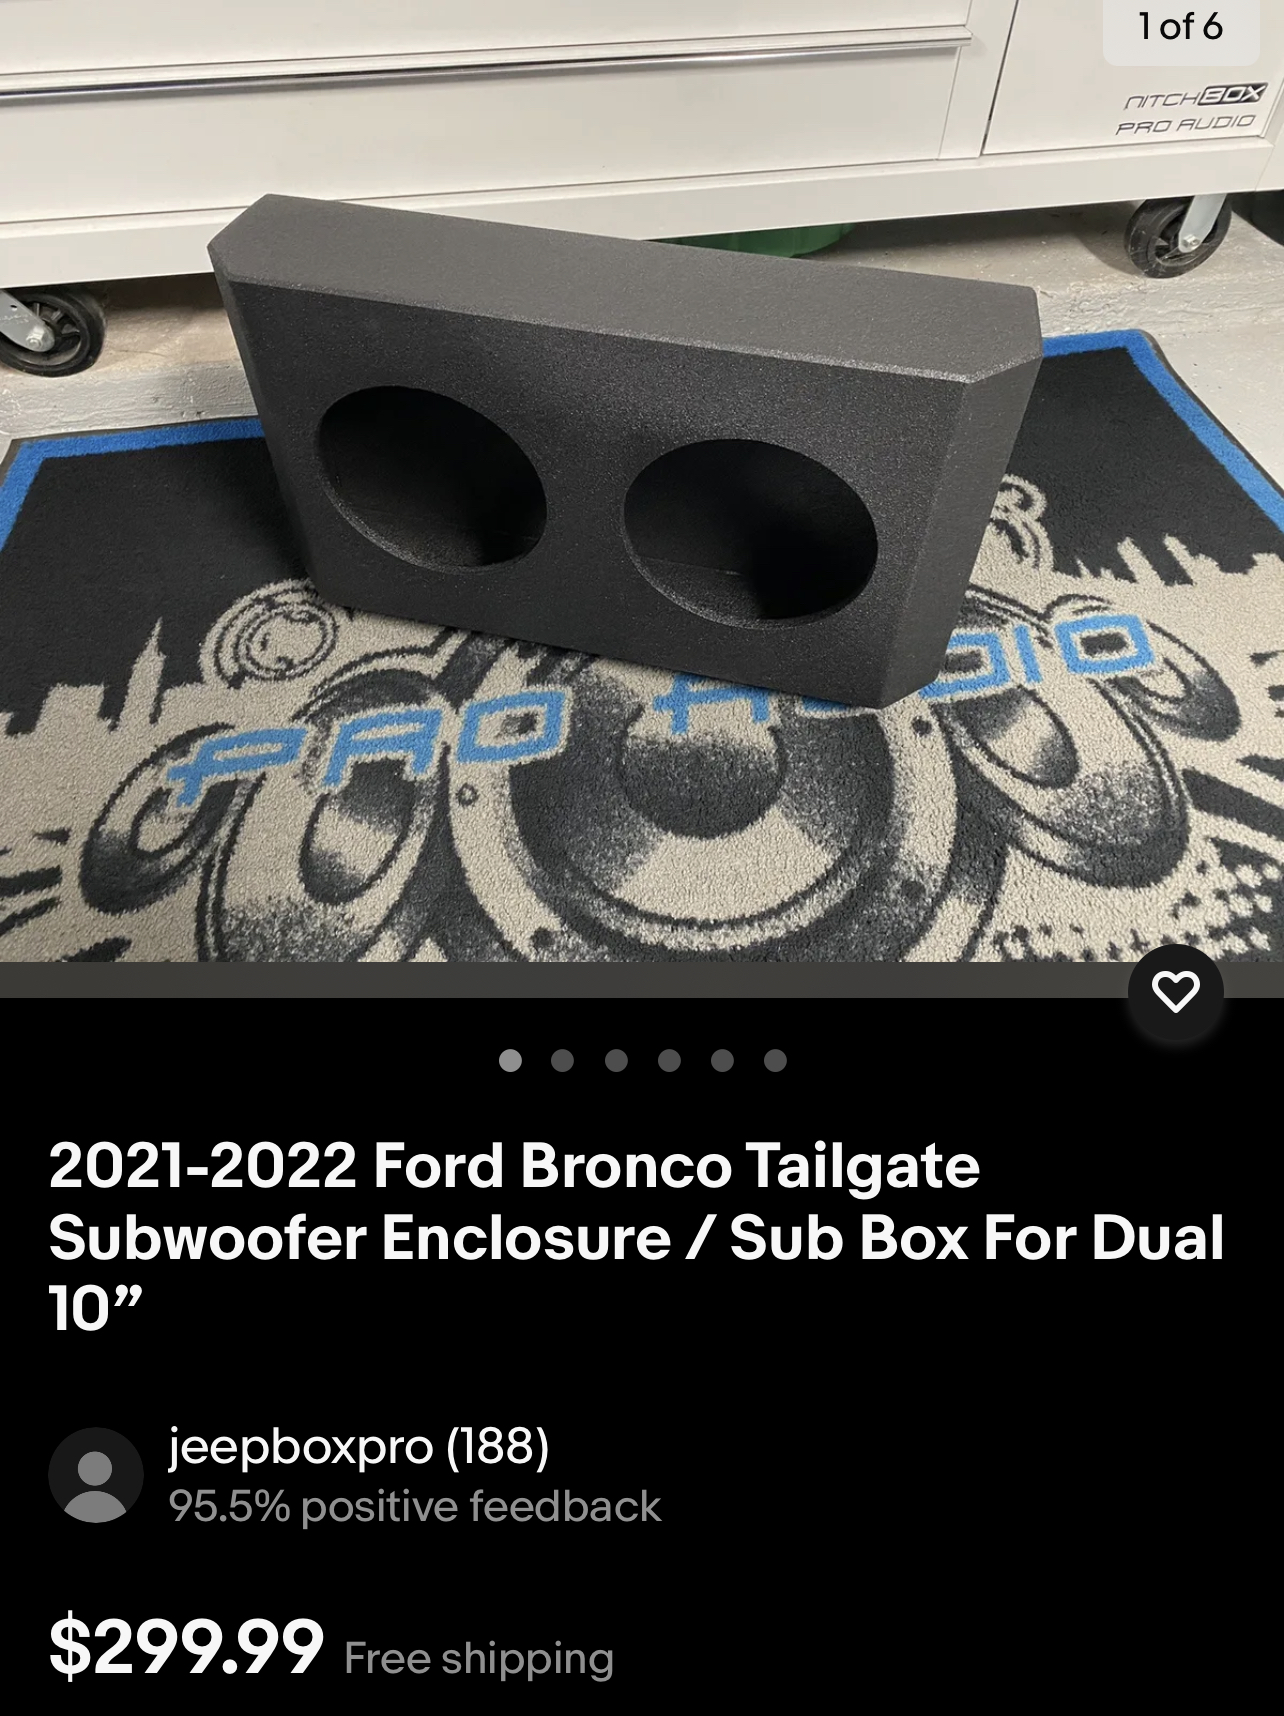 Ford Bronco Check out this tailgate subwoofer enclosure 85C6794F-B520-4D9B-95F3-42E8FA5C9C03